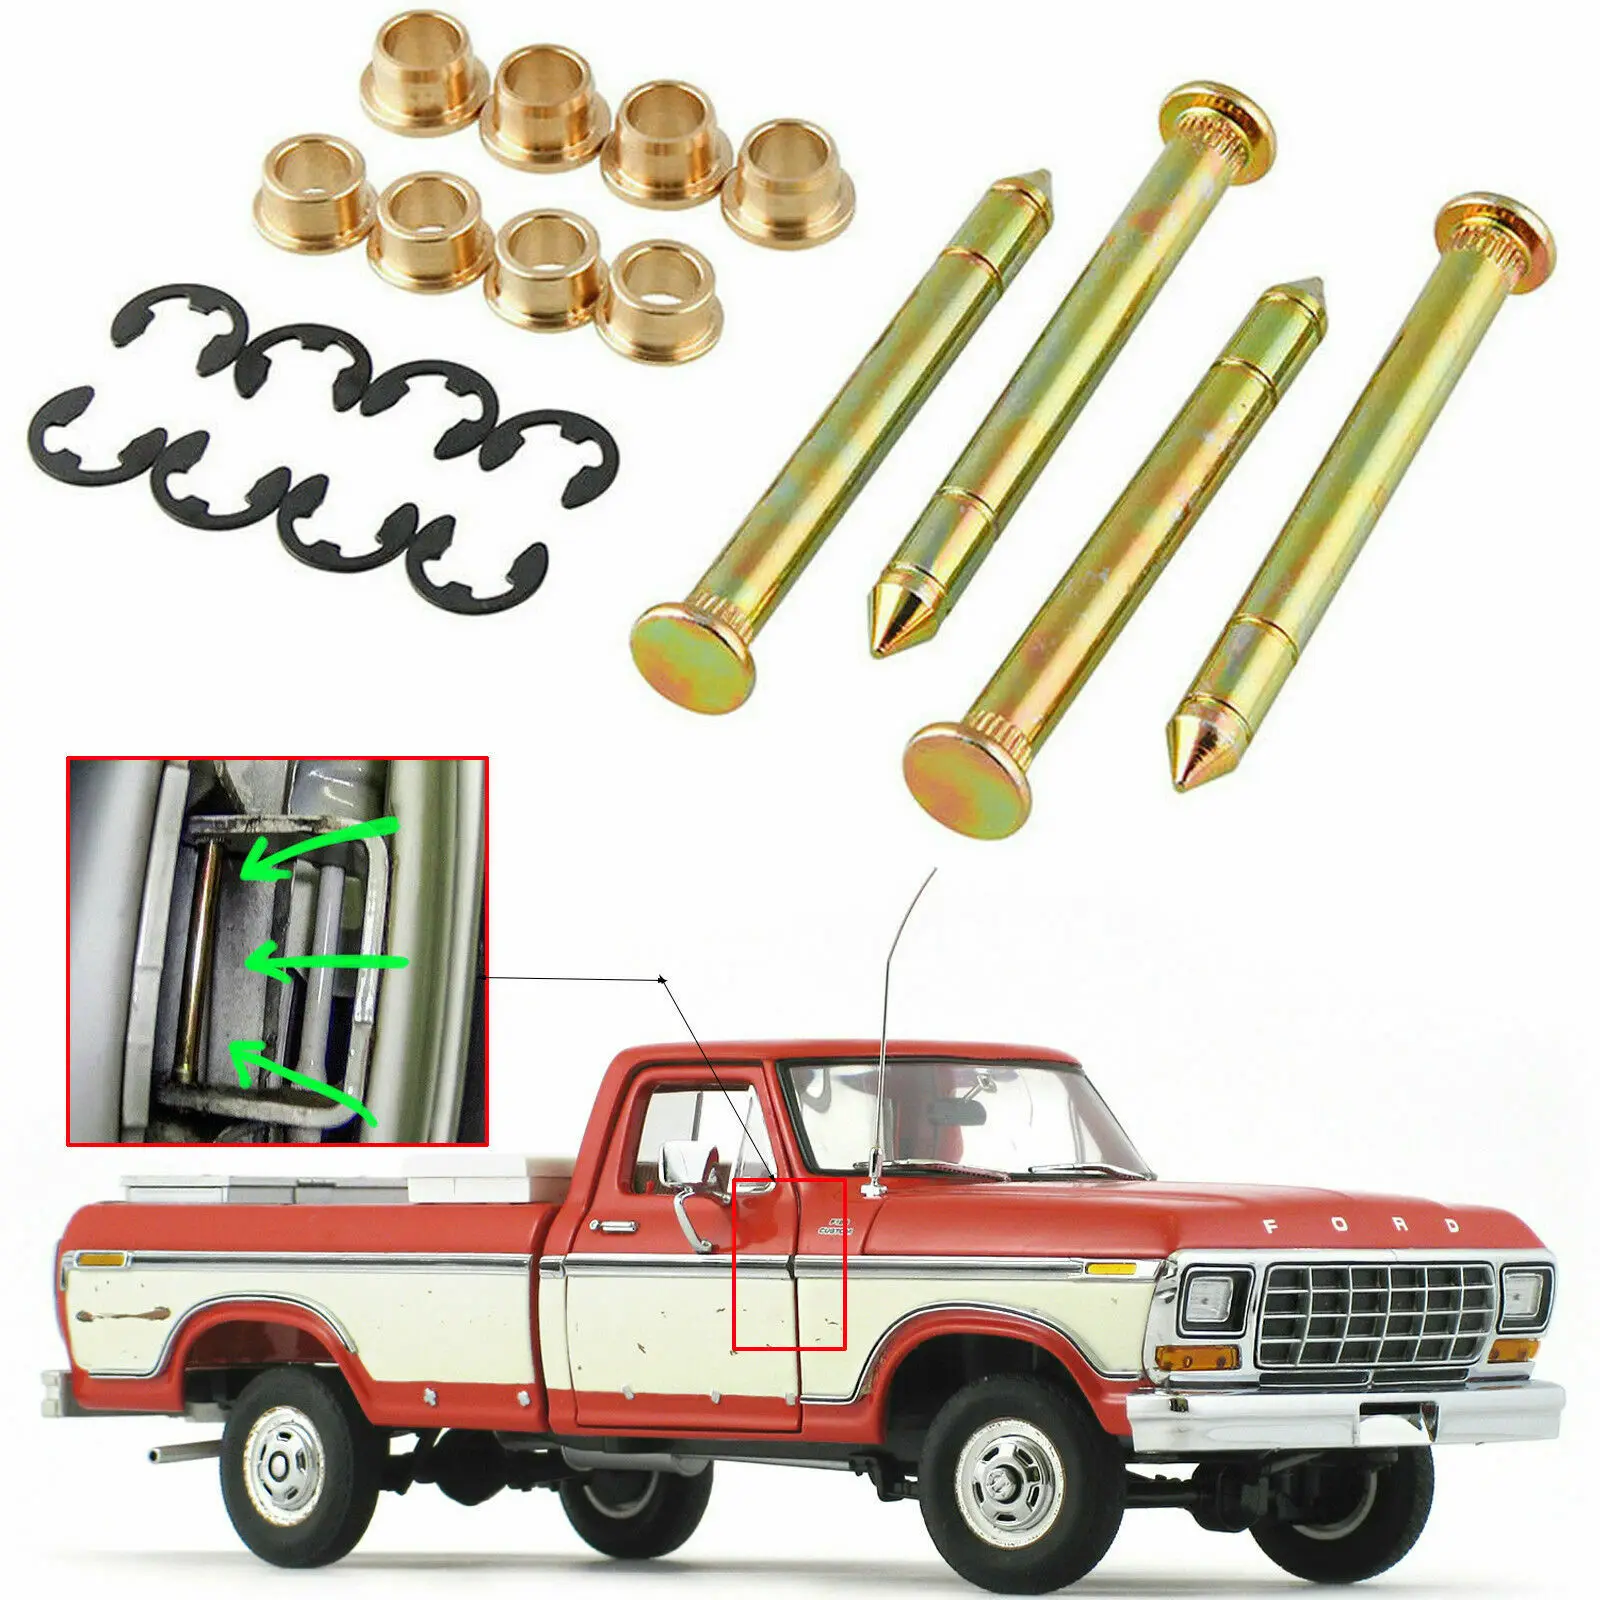 

1 set Car Doors Hinge Pins Pin Bushing Kit Restore Doorman Replacement Fit For Ford F150 F250 F350 Bronco Heavy Duty